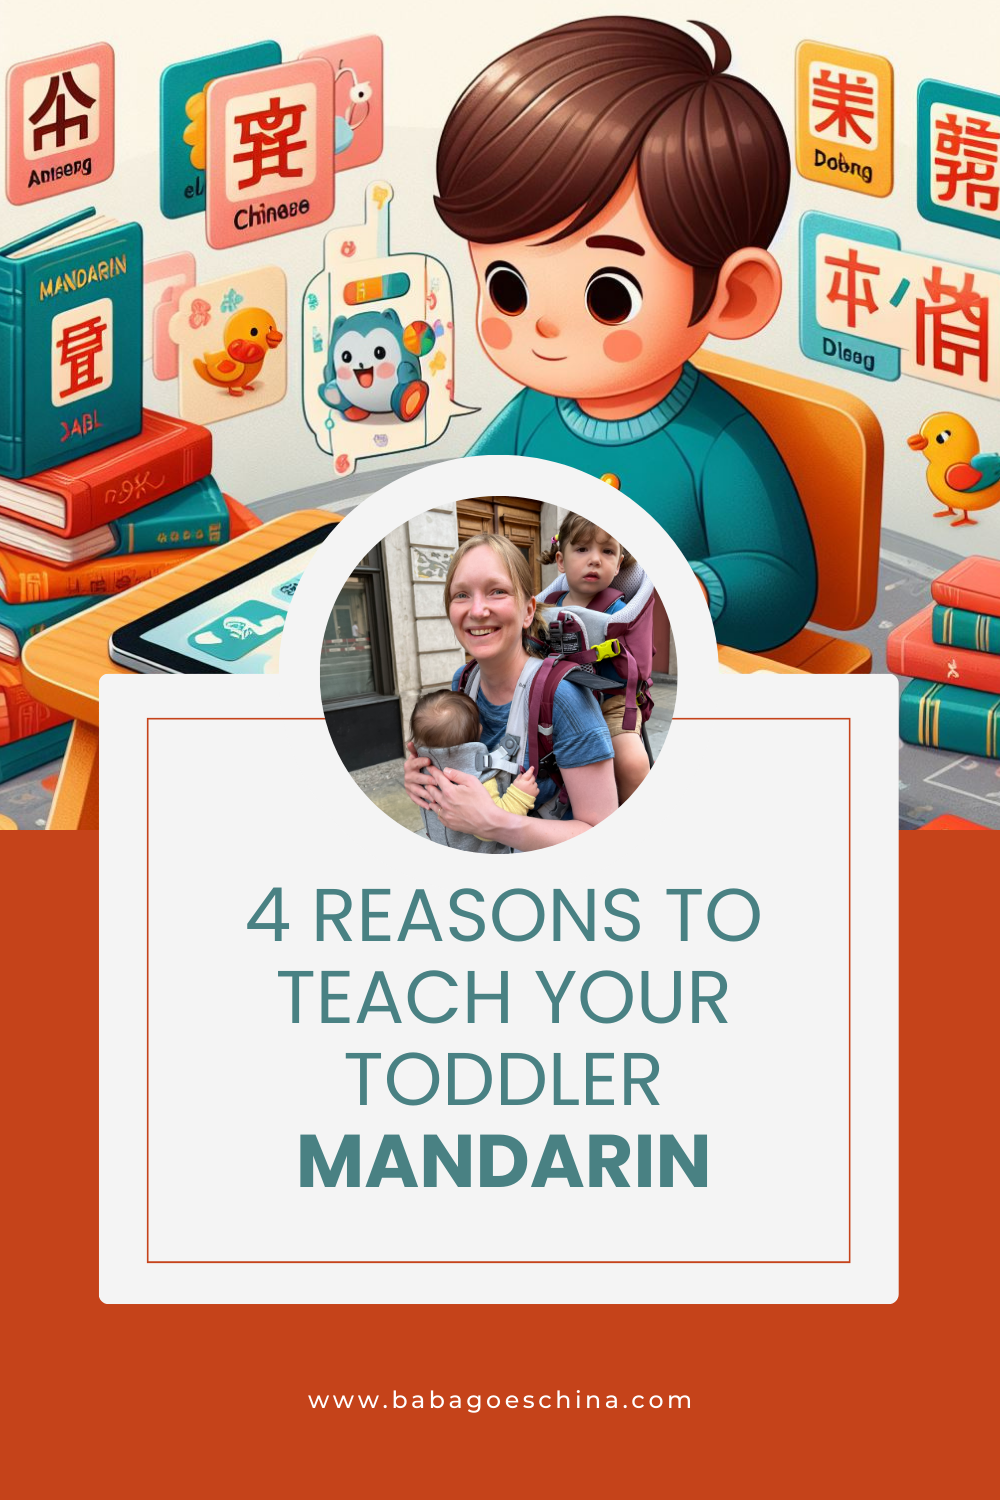 Why we signed up our 2 year old daughter for Mandarin classes - and so should you!